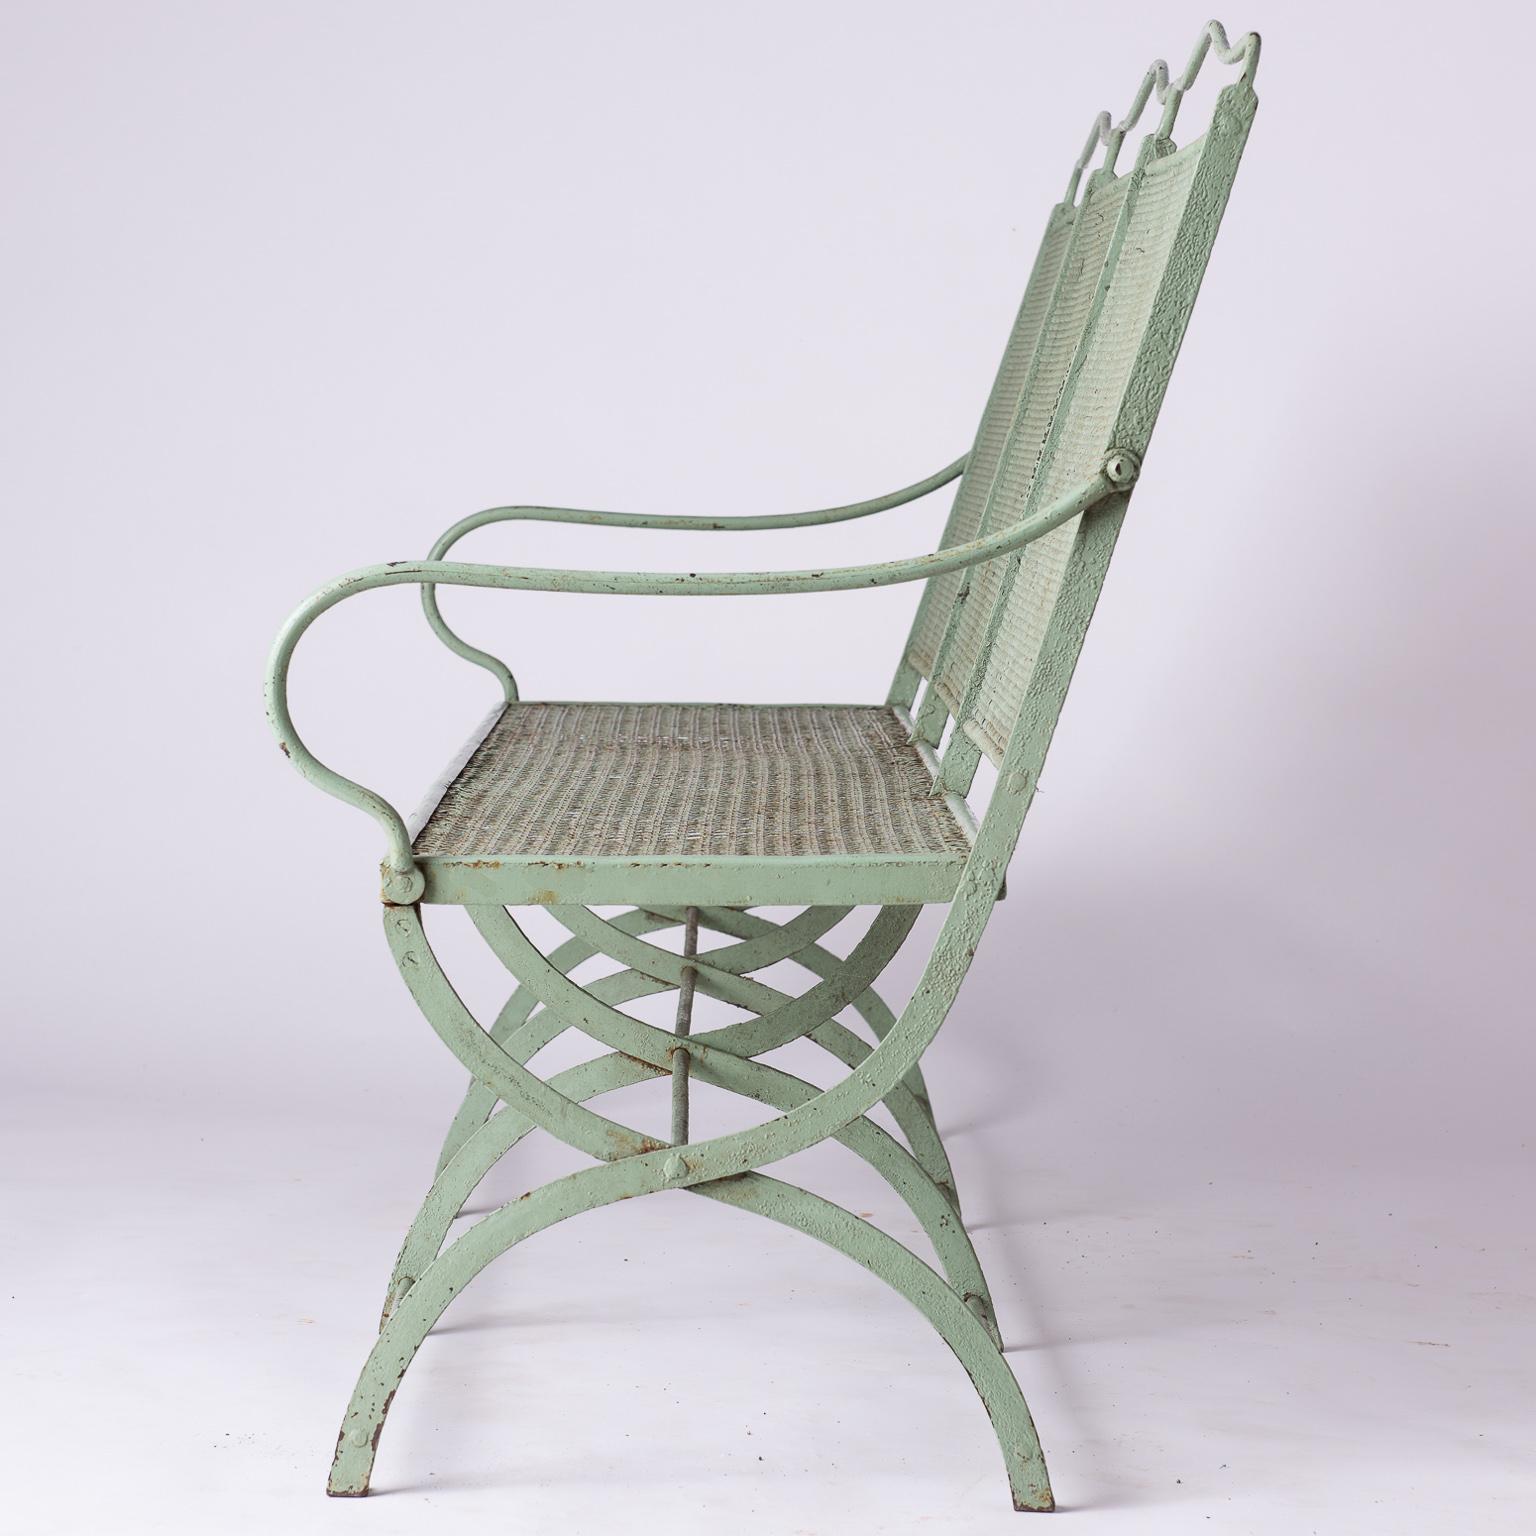 French Wrought Iron Garden Bench with Old Green Paint, circa 1920 For Sale 1